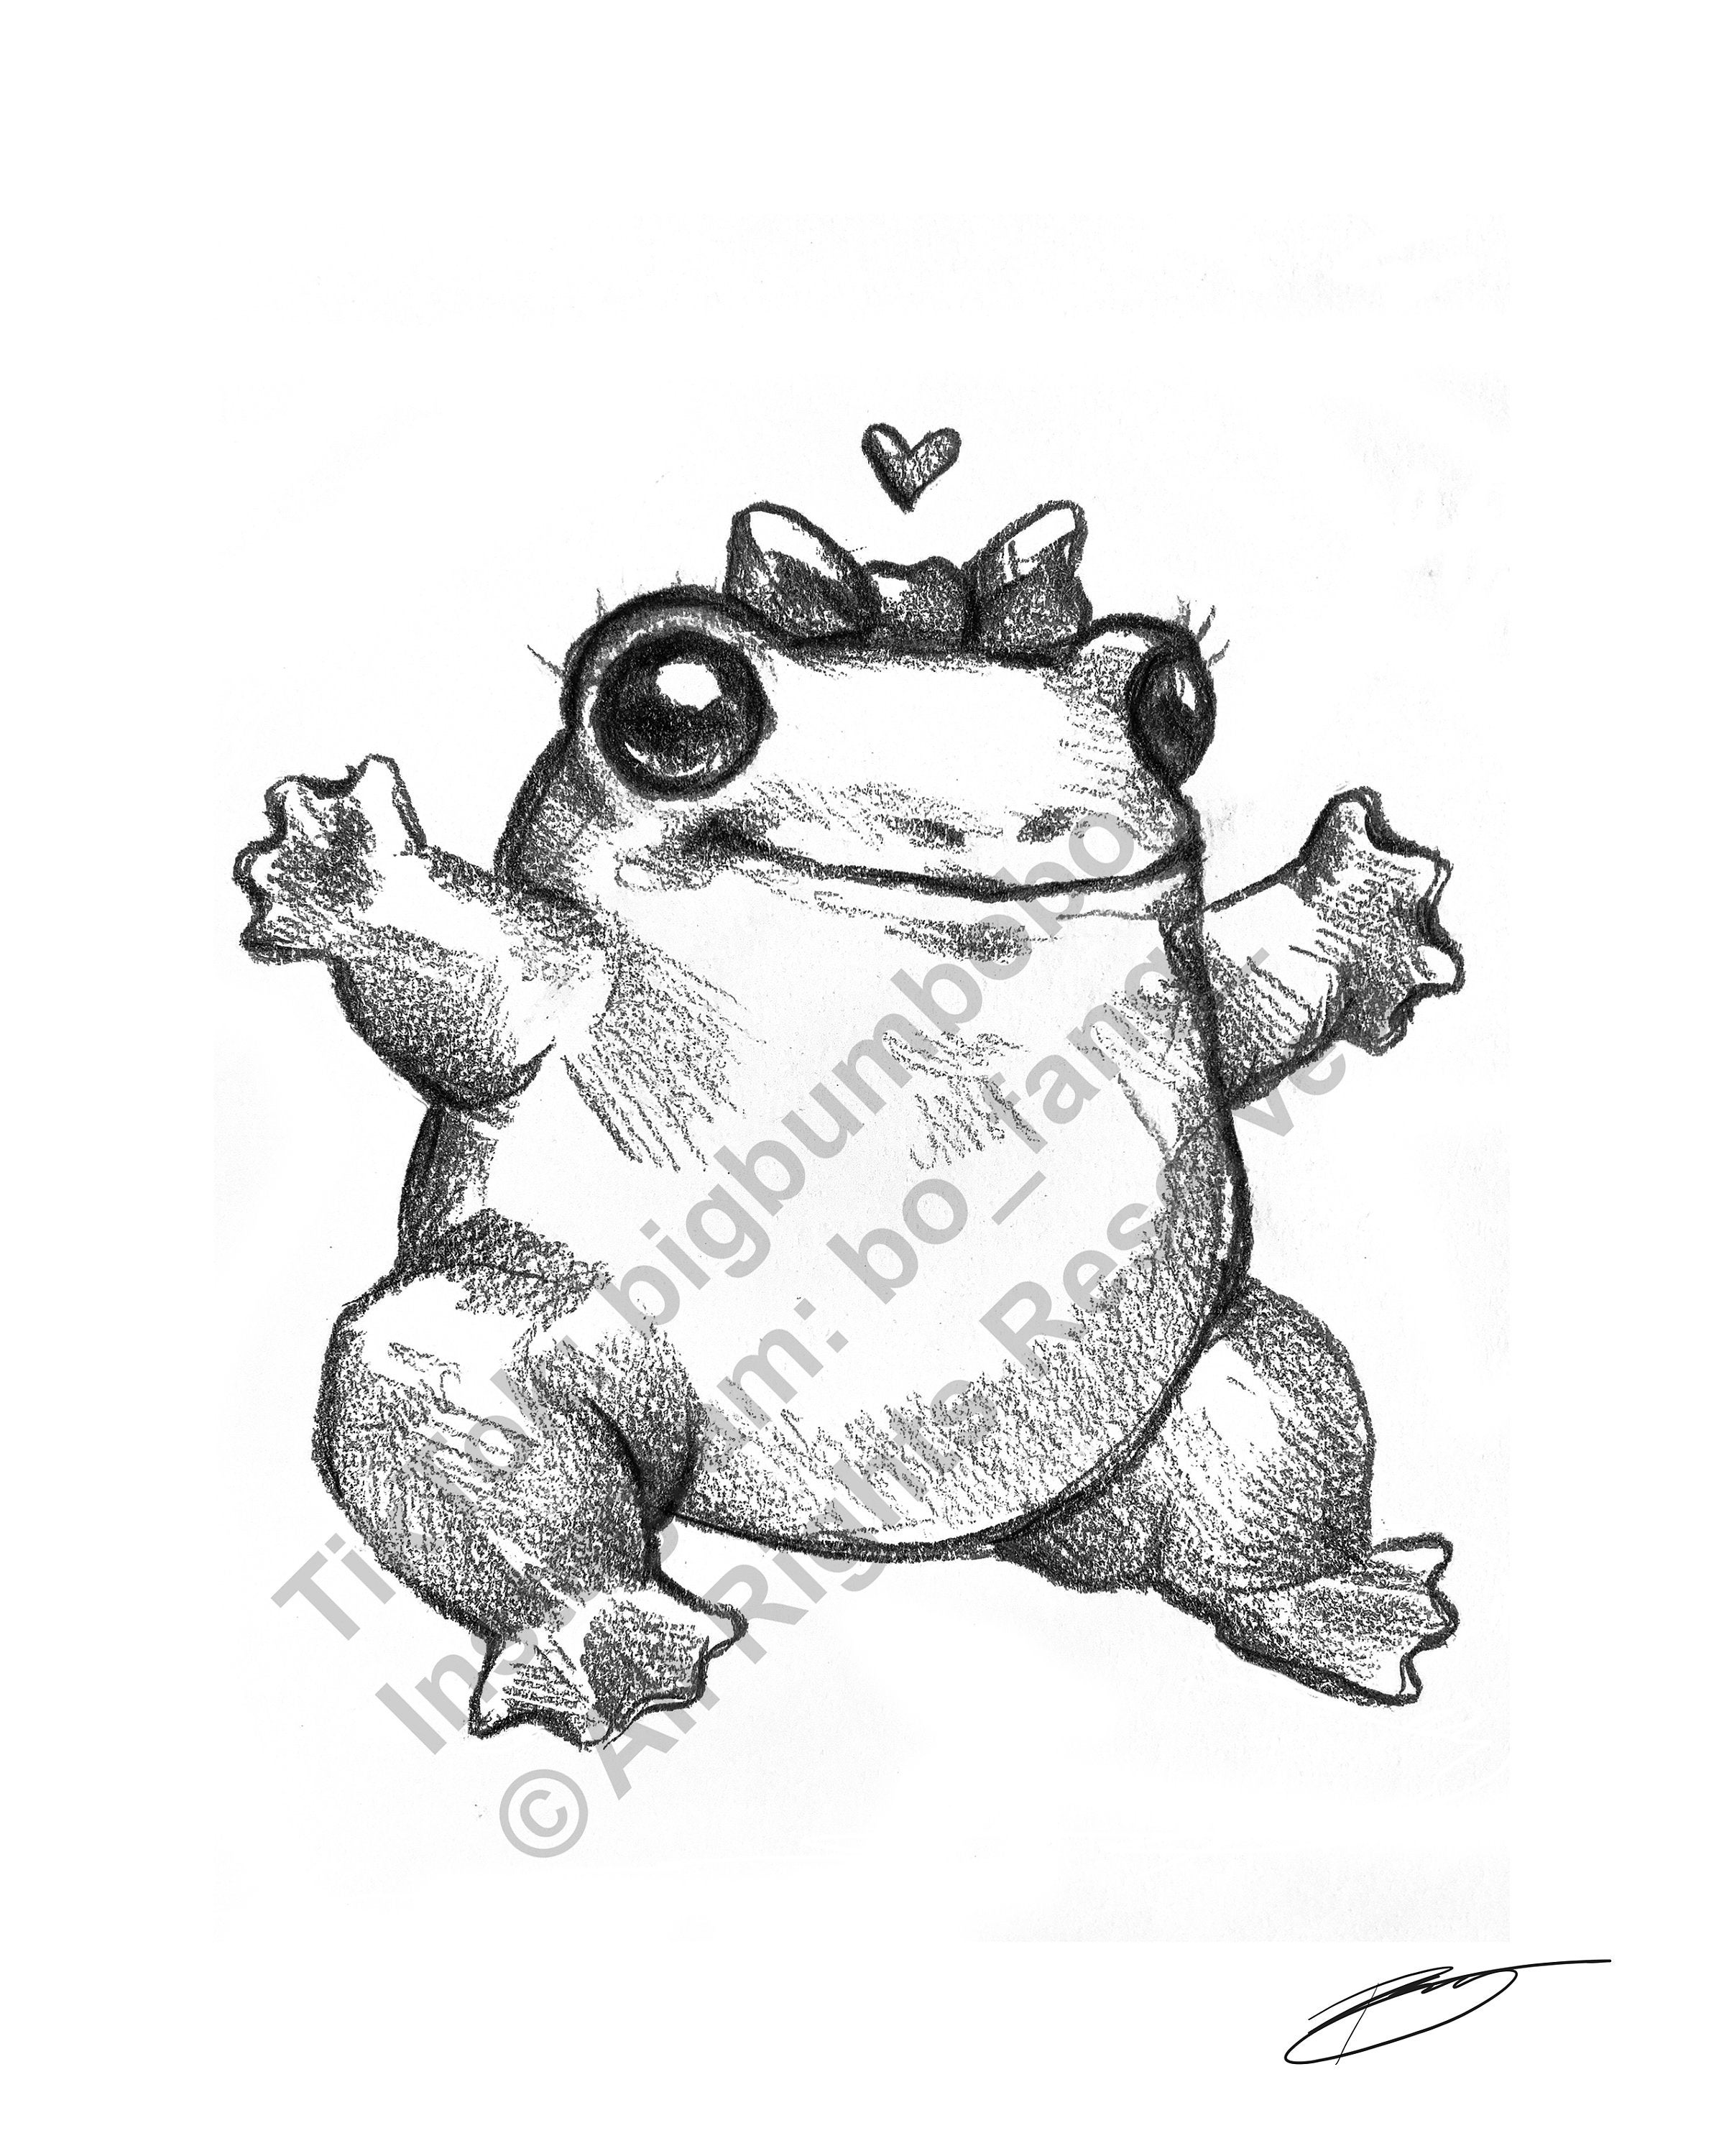 Fat Little Baby Frog Sketch Drawing Illustration 8.5 X 11 Animal Art Print  -  Canada